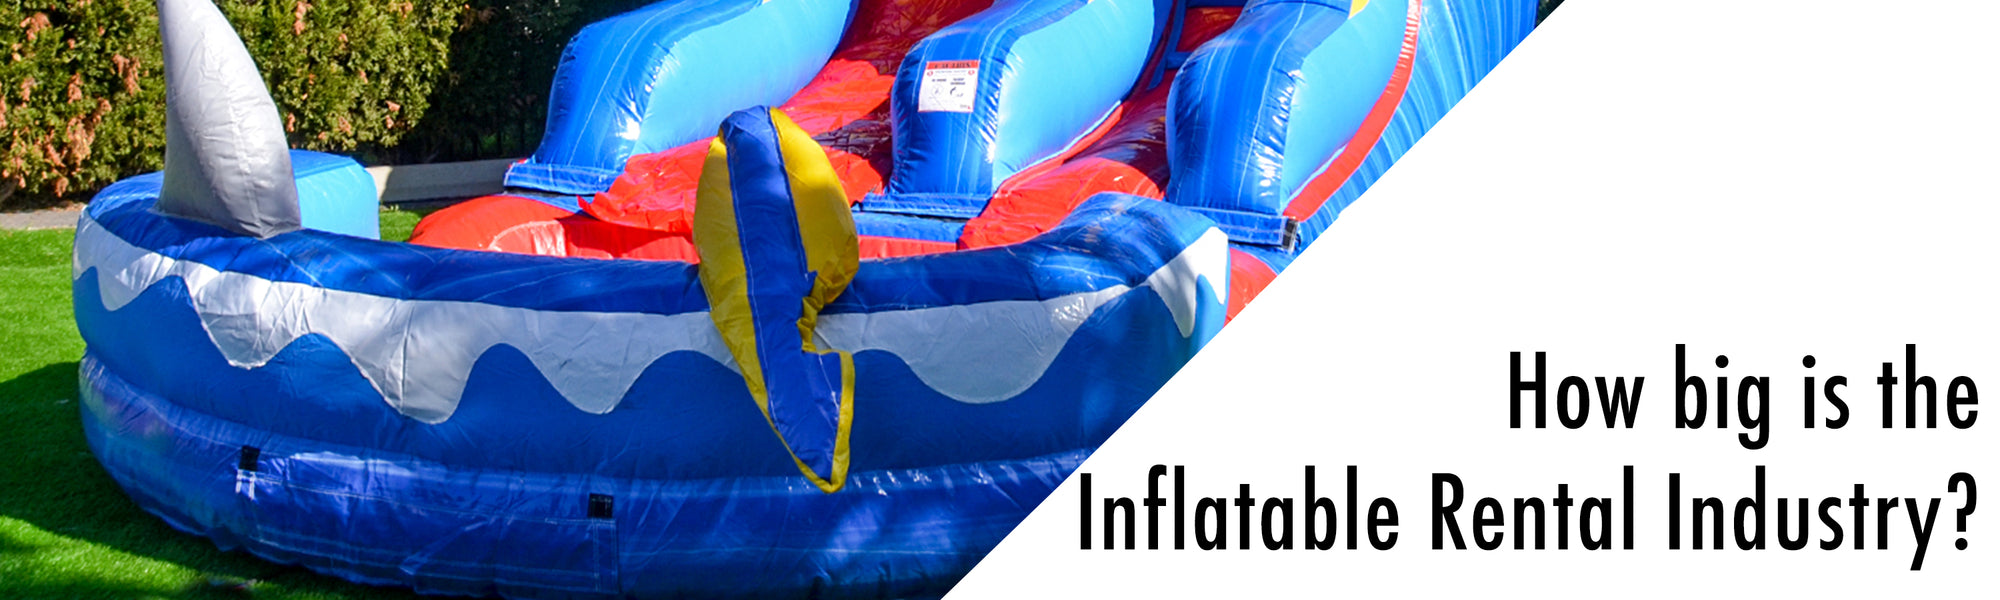 How big is the inflatable rental industry?